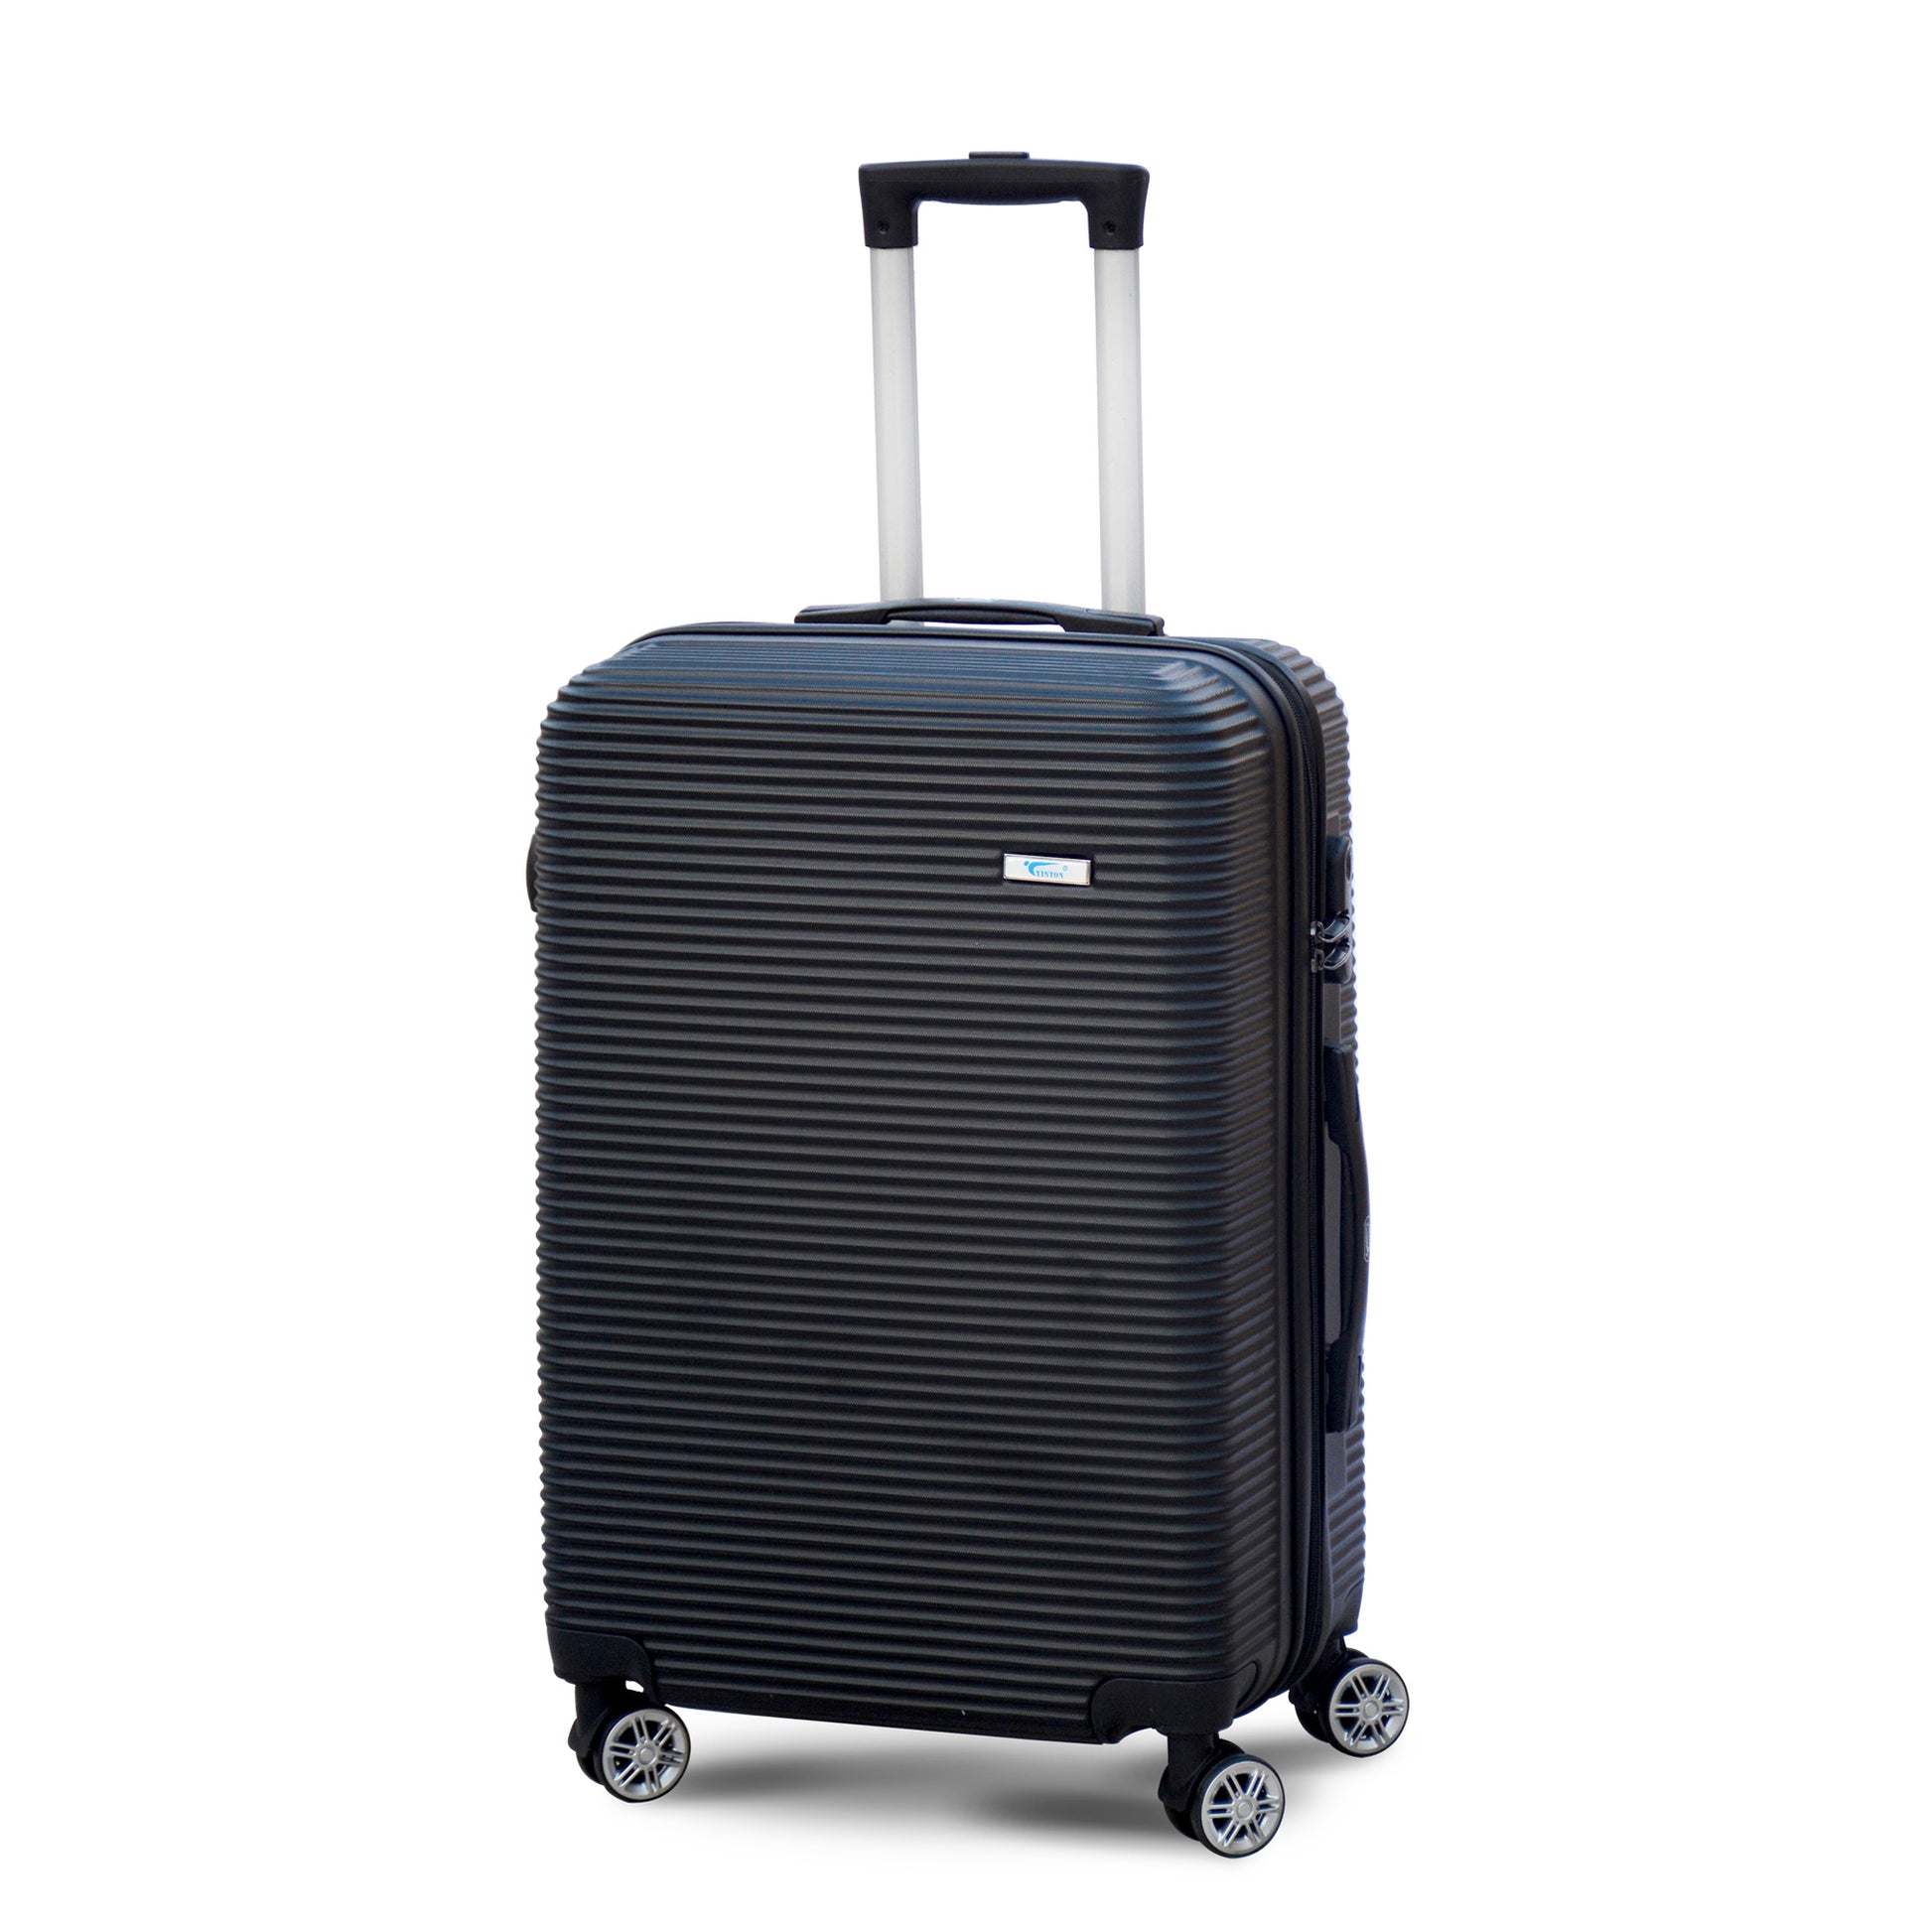 3 Piece Set 20" 24" 28 Inches Black Colour JIAN ABS Line Luggage lightweight Hard Case Trolley Bag With Spinner Wheel Zaappy.com